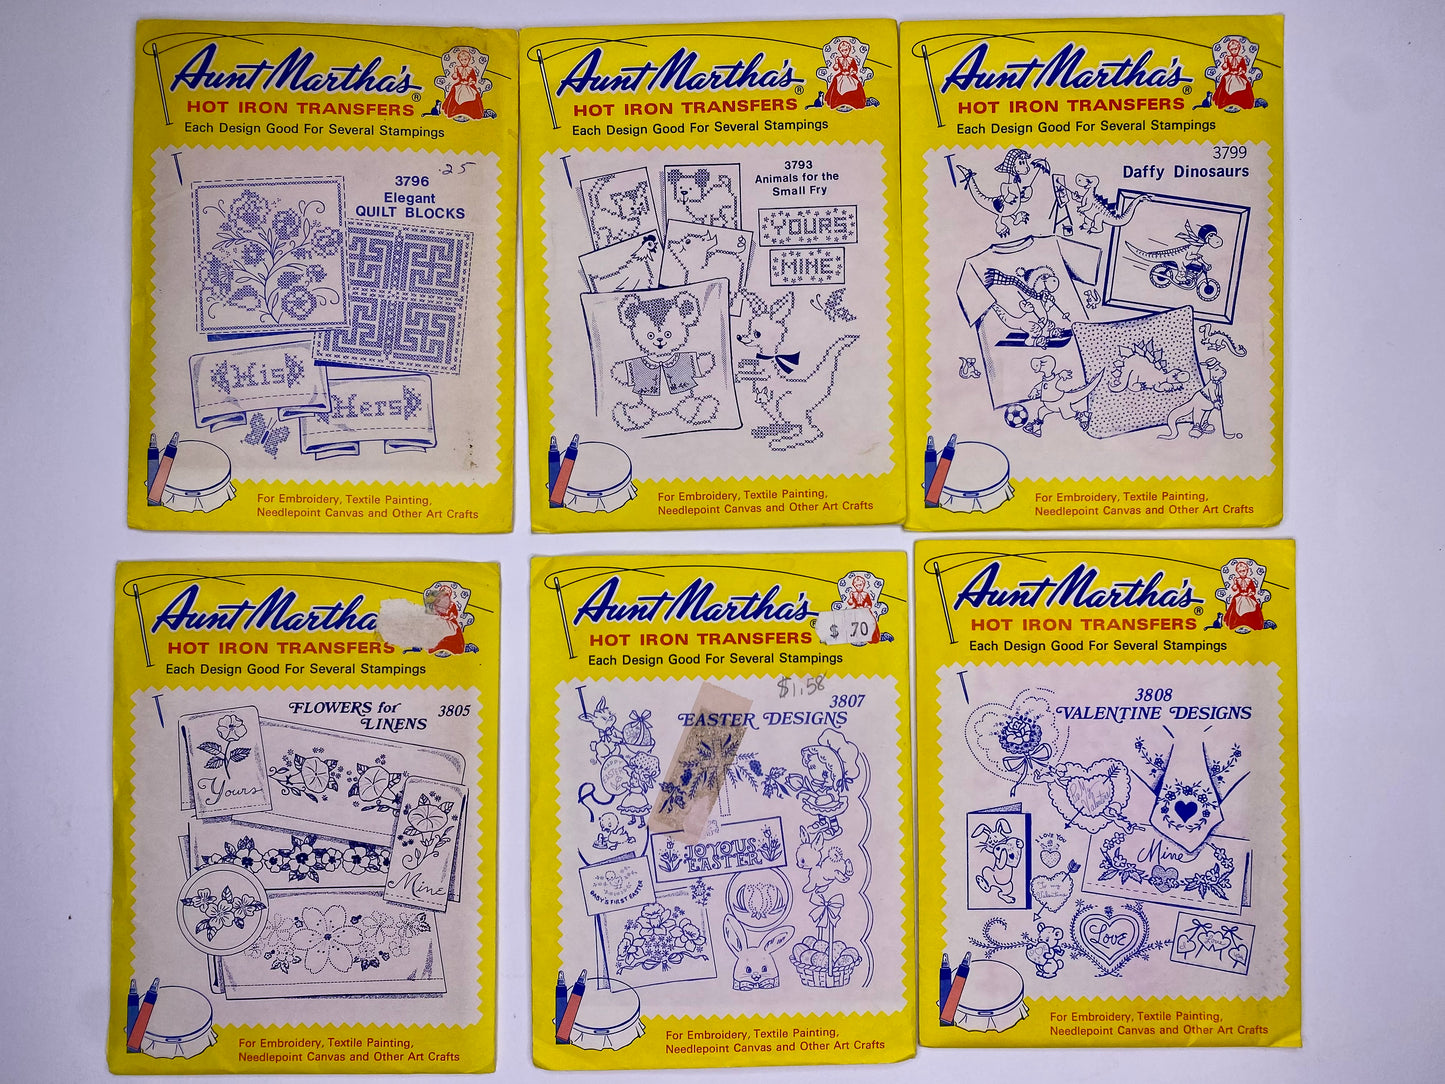 Aunt Martha's Hot Iron Transfers 3796 Elegant Quilt Blocks, 3805 Flowers, 3793 Animals for the Small Fry, 3807 Easter Designs, 3799 Daffy Dinosaurs, 3808 Valentins Designs